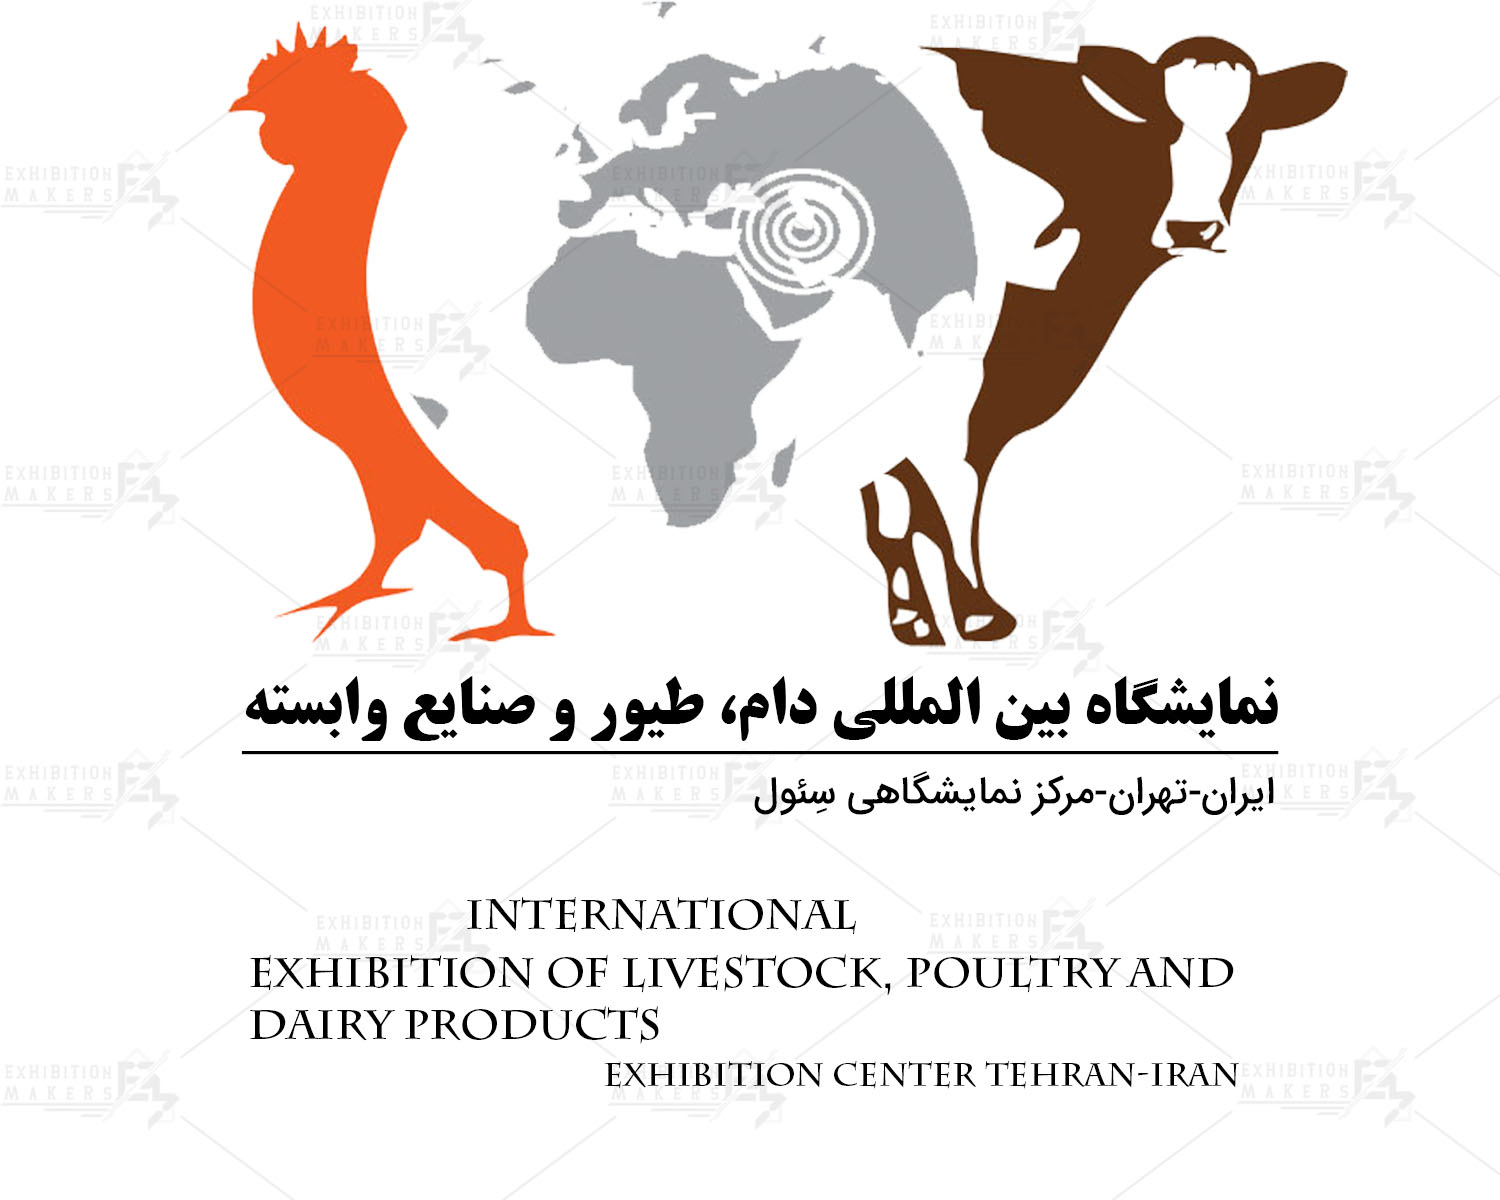 The Tehran International Exhibition of Livestock, poultry and dairy products